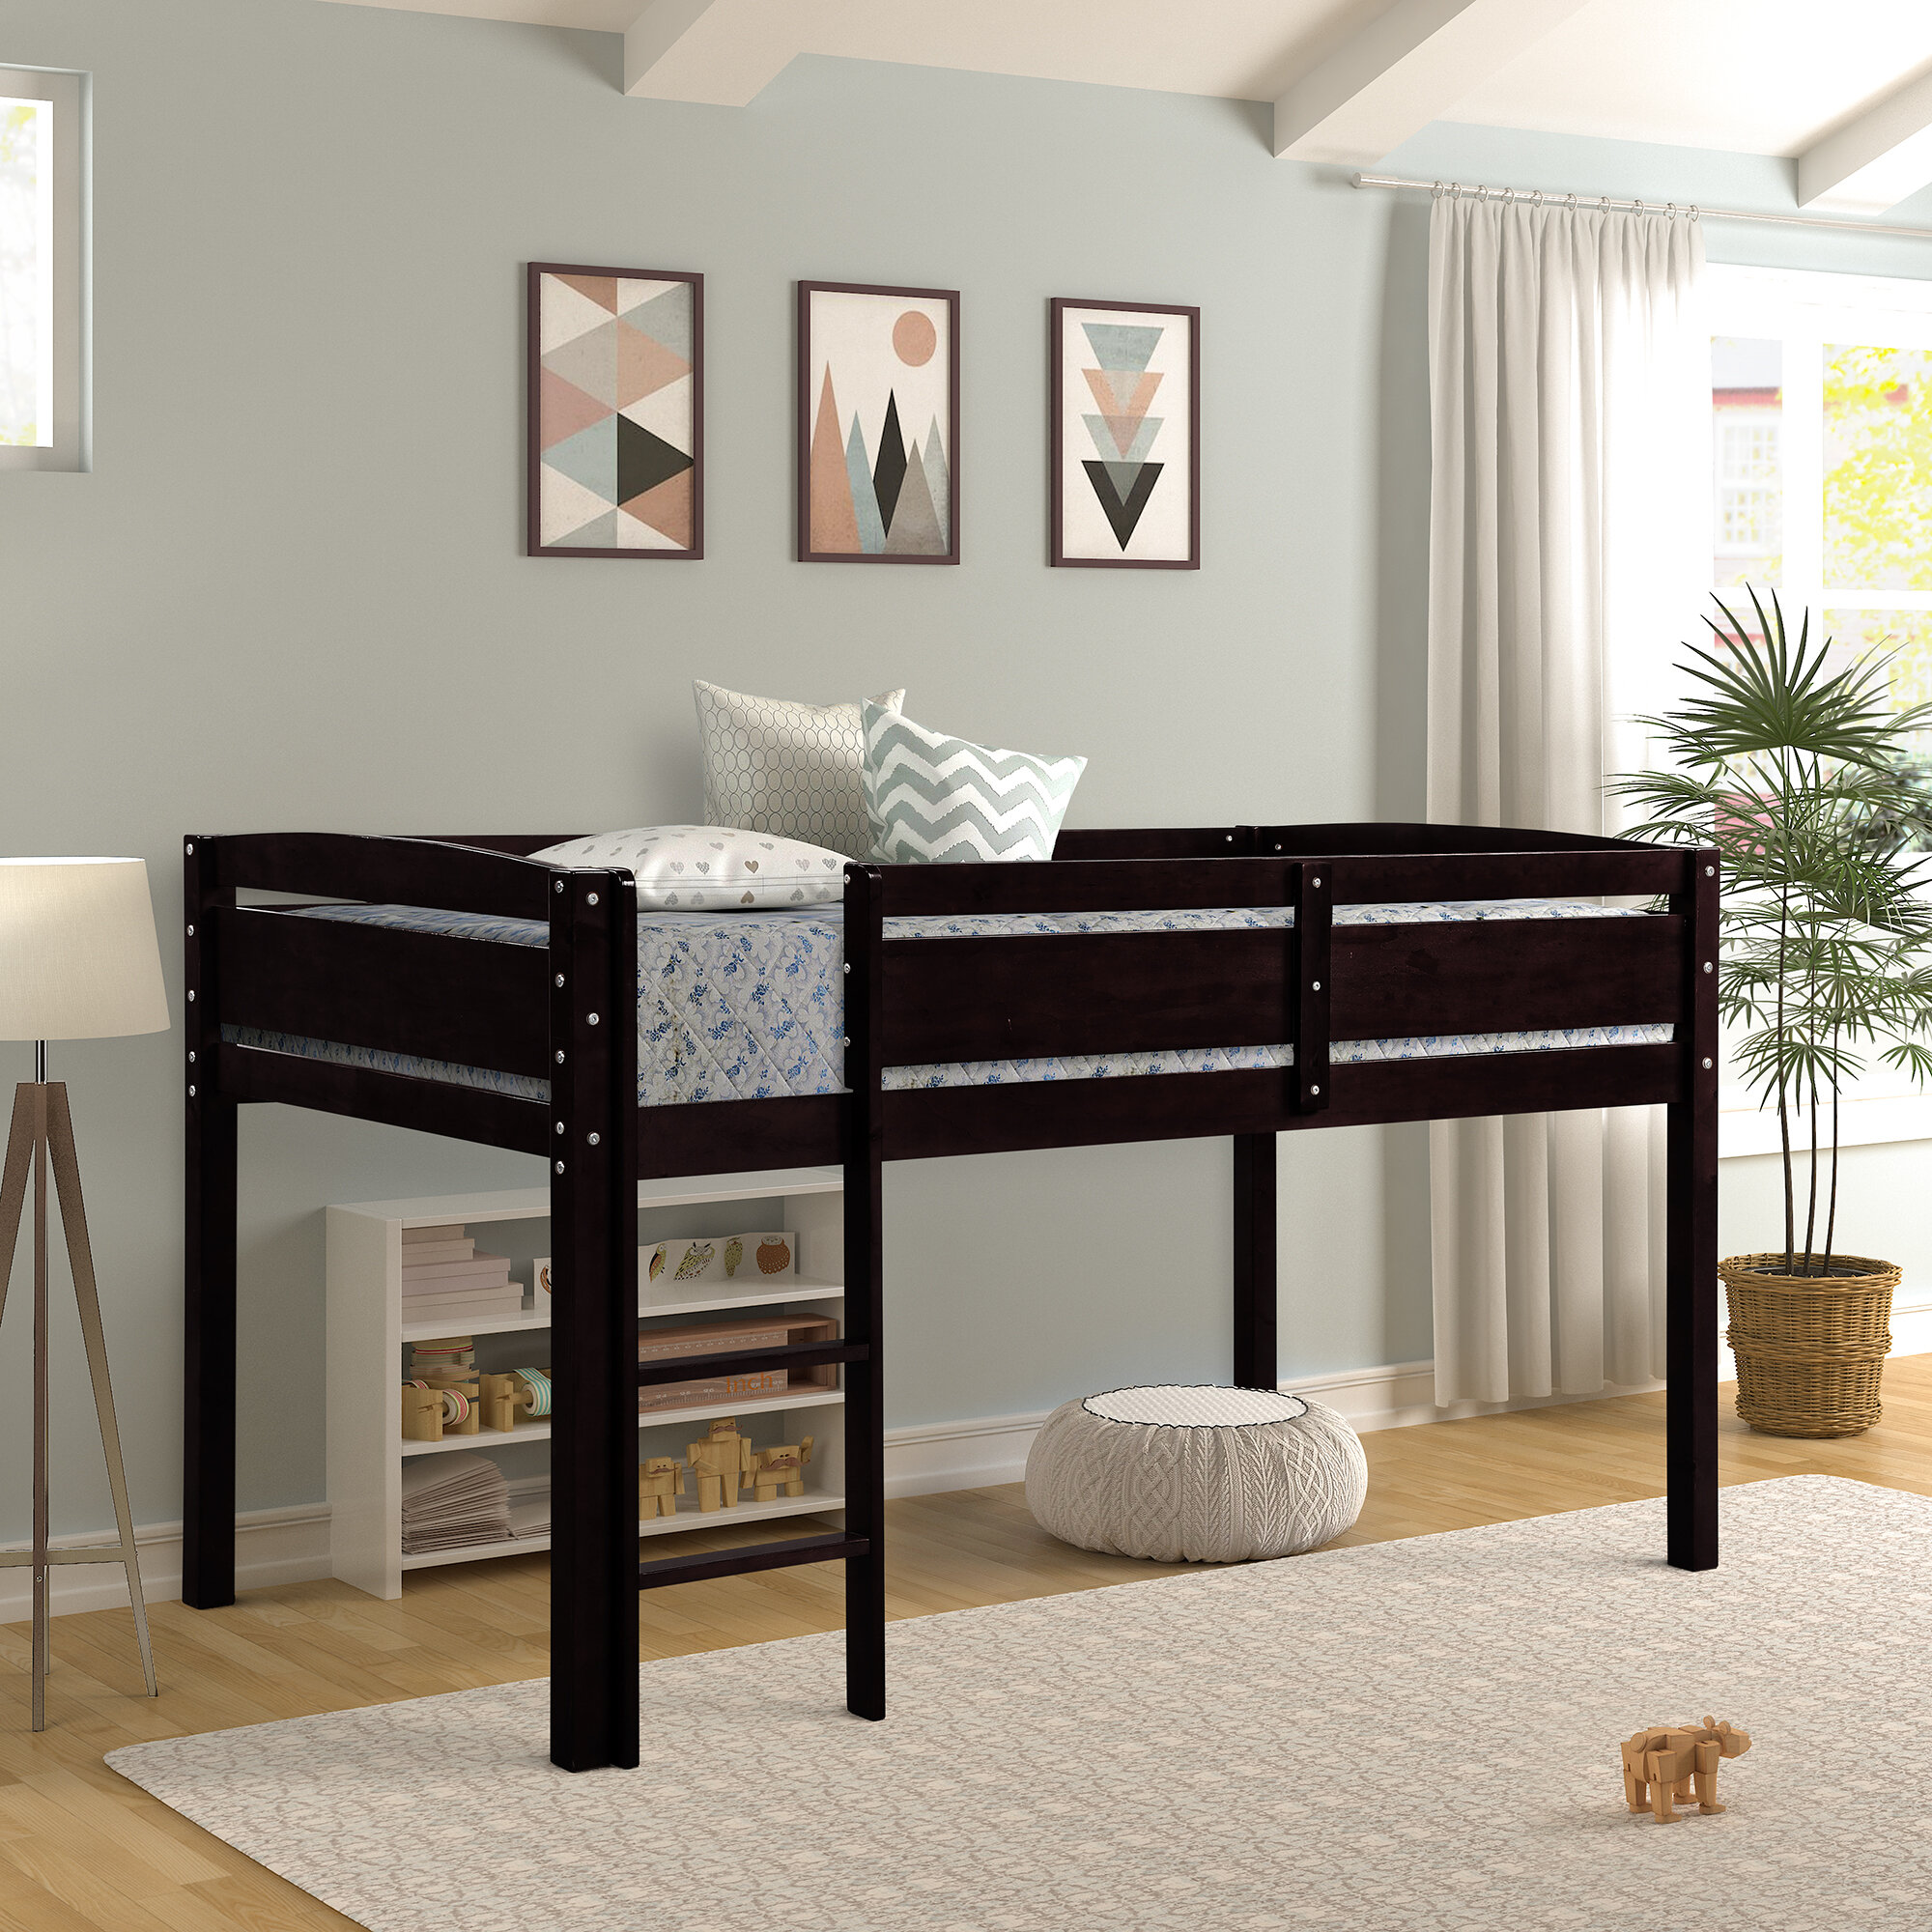 elevated bed for kids